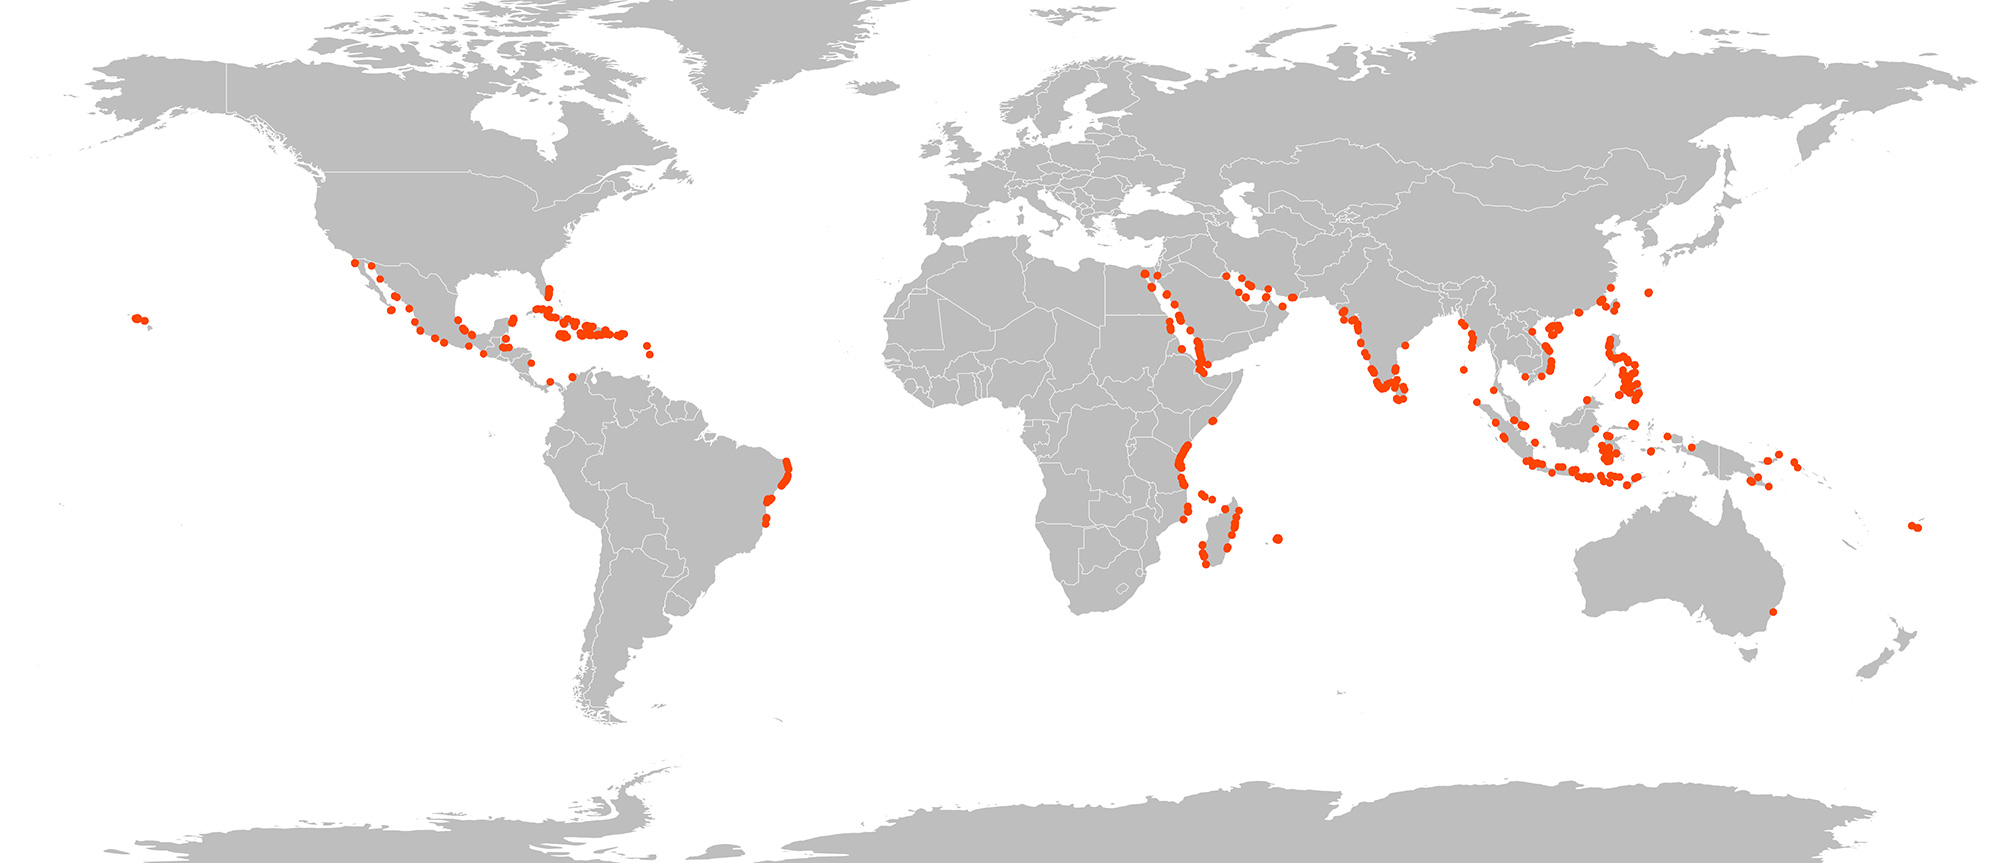 Global map of wastewater hotspots overlapping with coral habitat